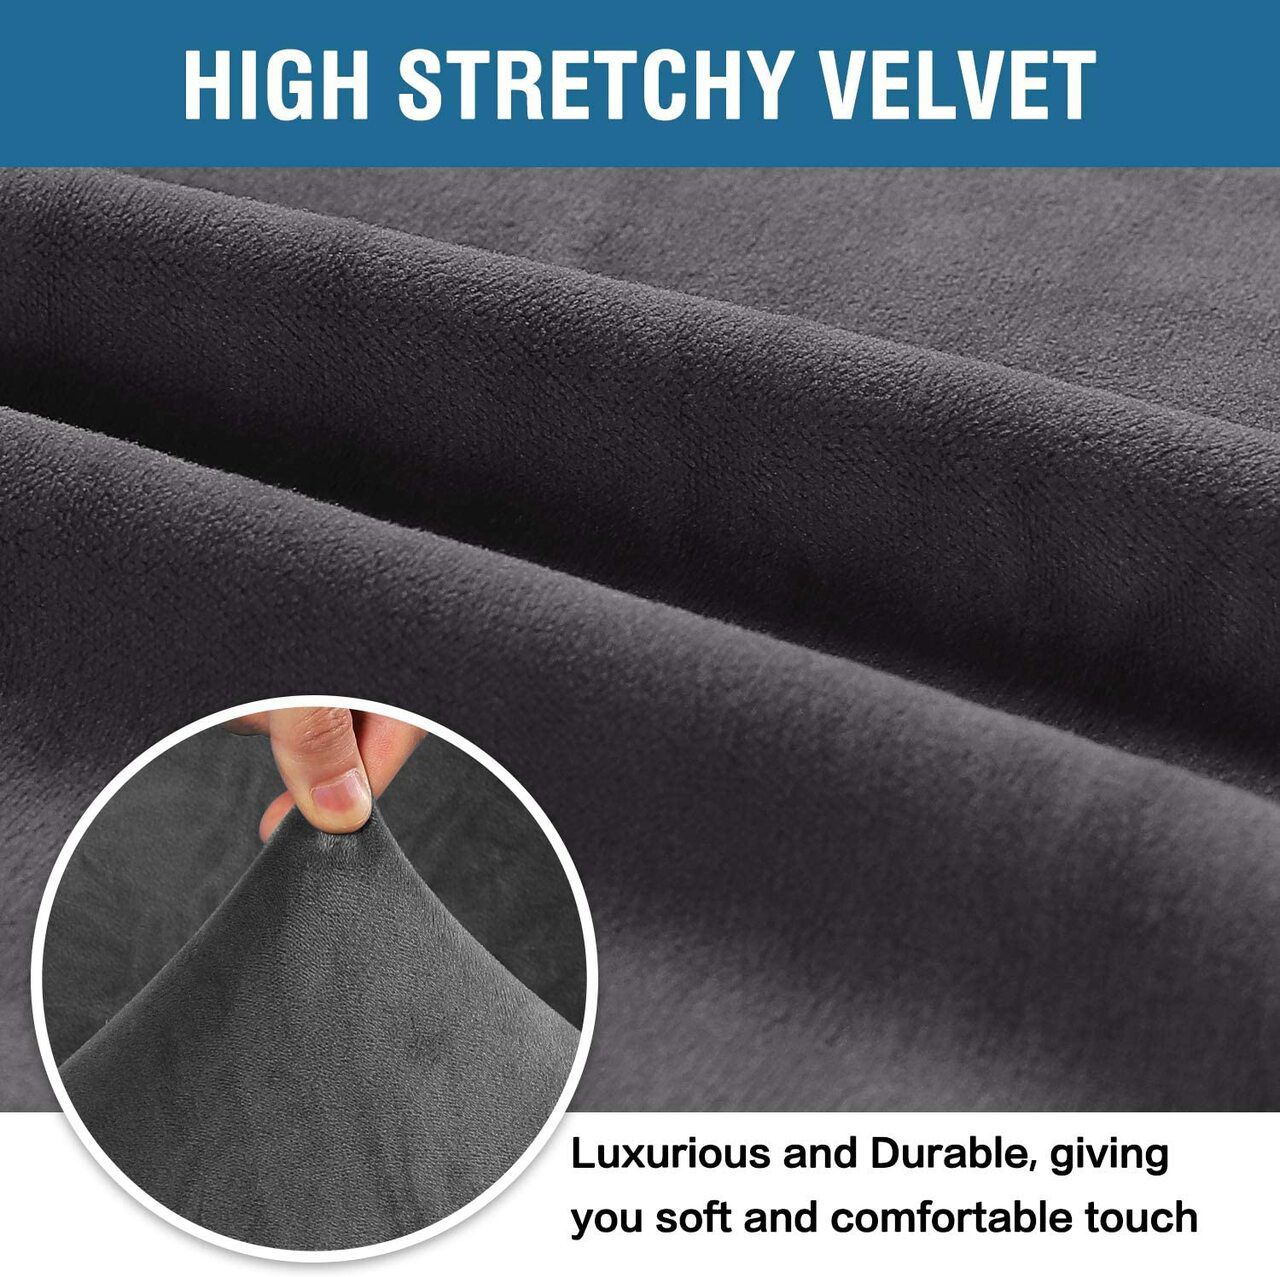 Ultra Soft Thick Stretch Velvet Fabric Sofa Slipcover for 3 Cushion Couch Covers (Grey)